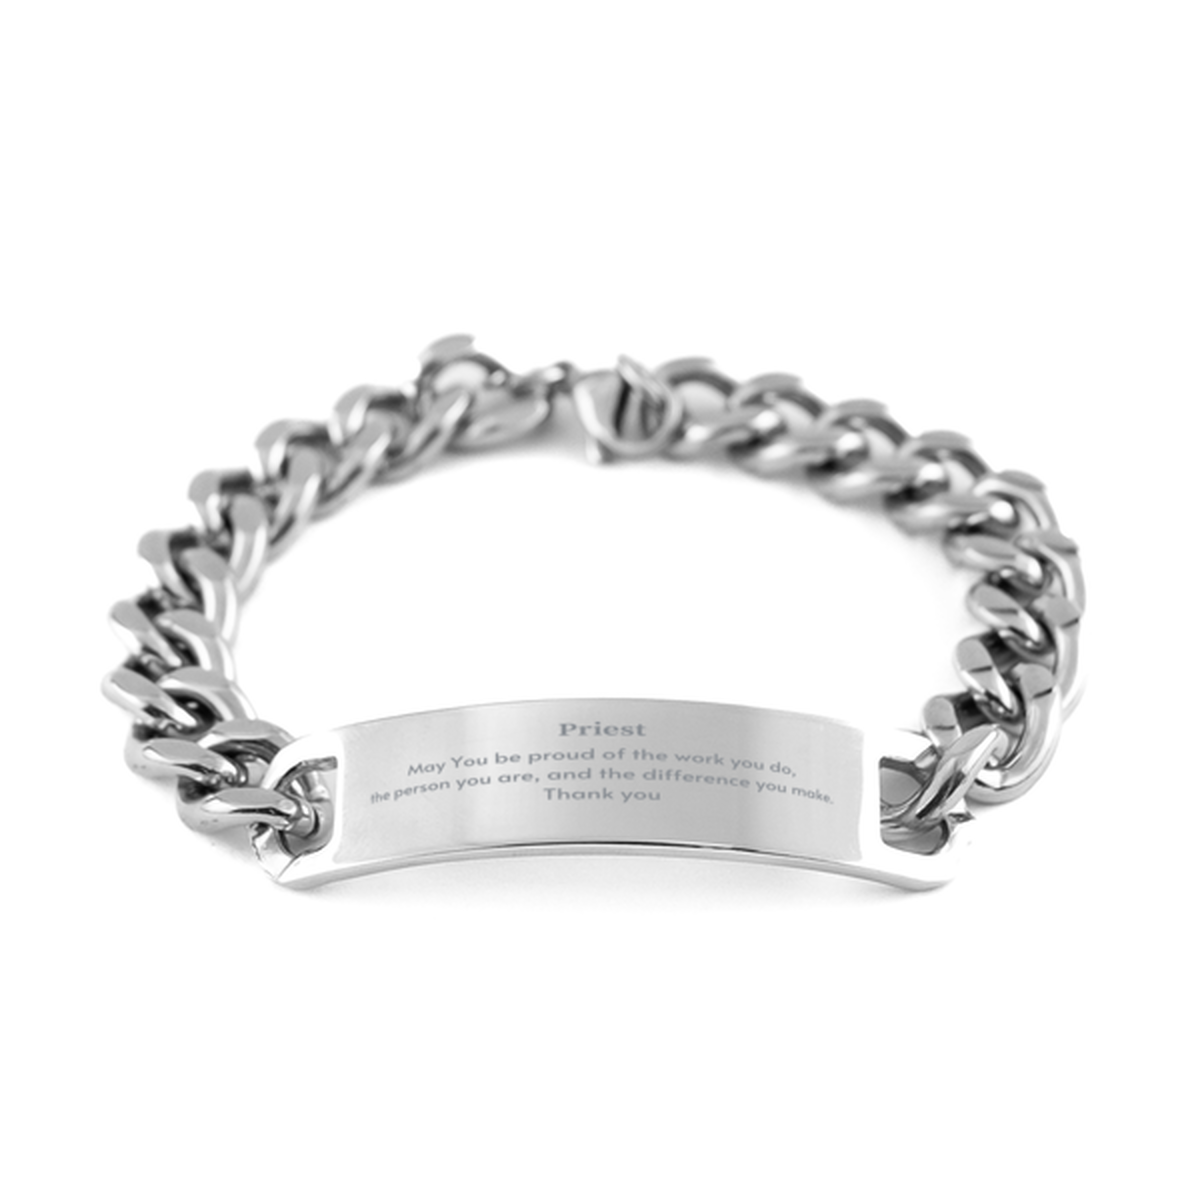 Heartwarming Cuban Chain Stainless Steel Bracelet Retirement Coworkers Gifts for Priest, Priest May You be proud of the work you do, the person you are Gifts for Boss Men Women Friends